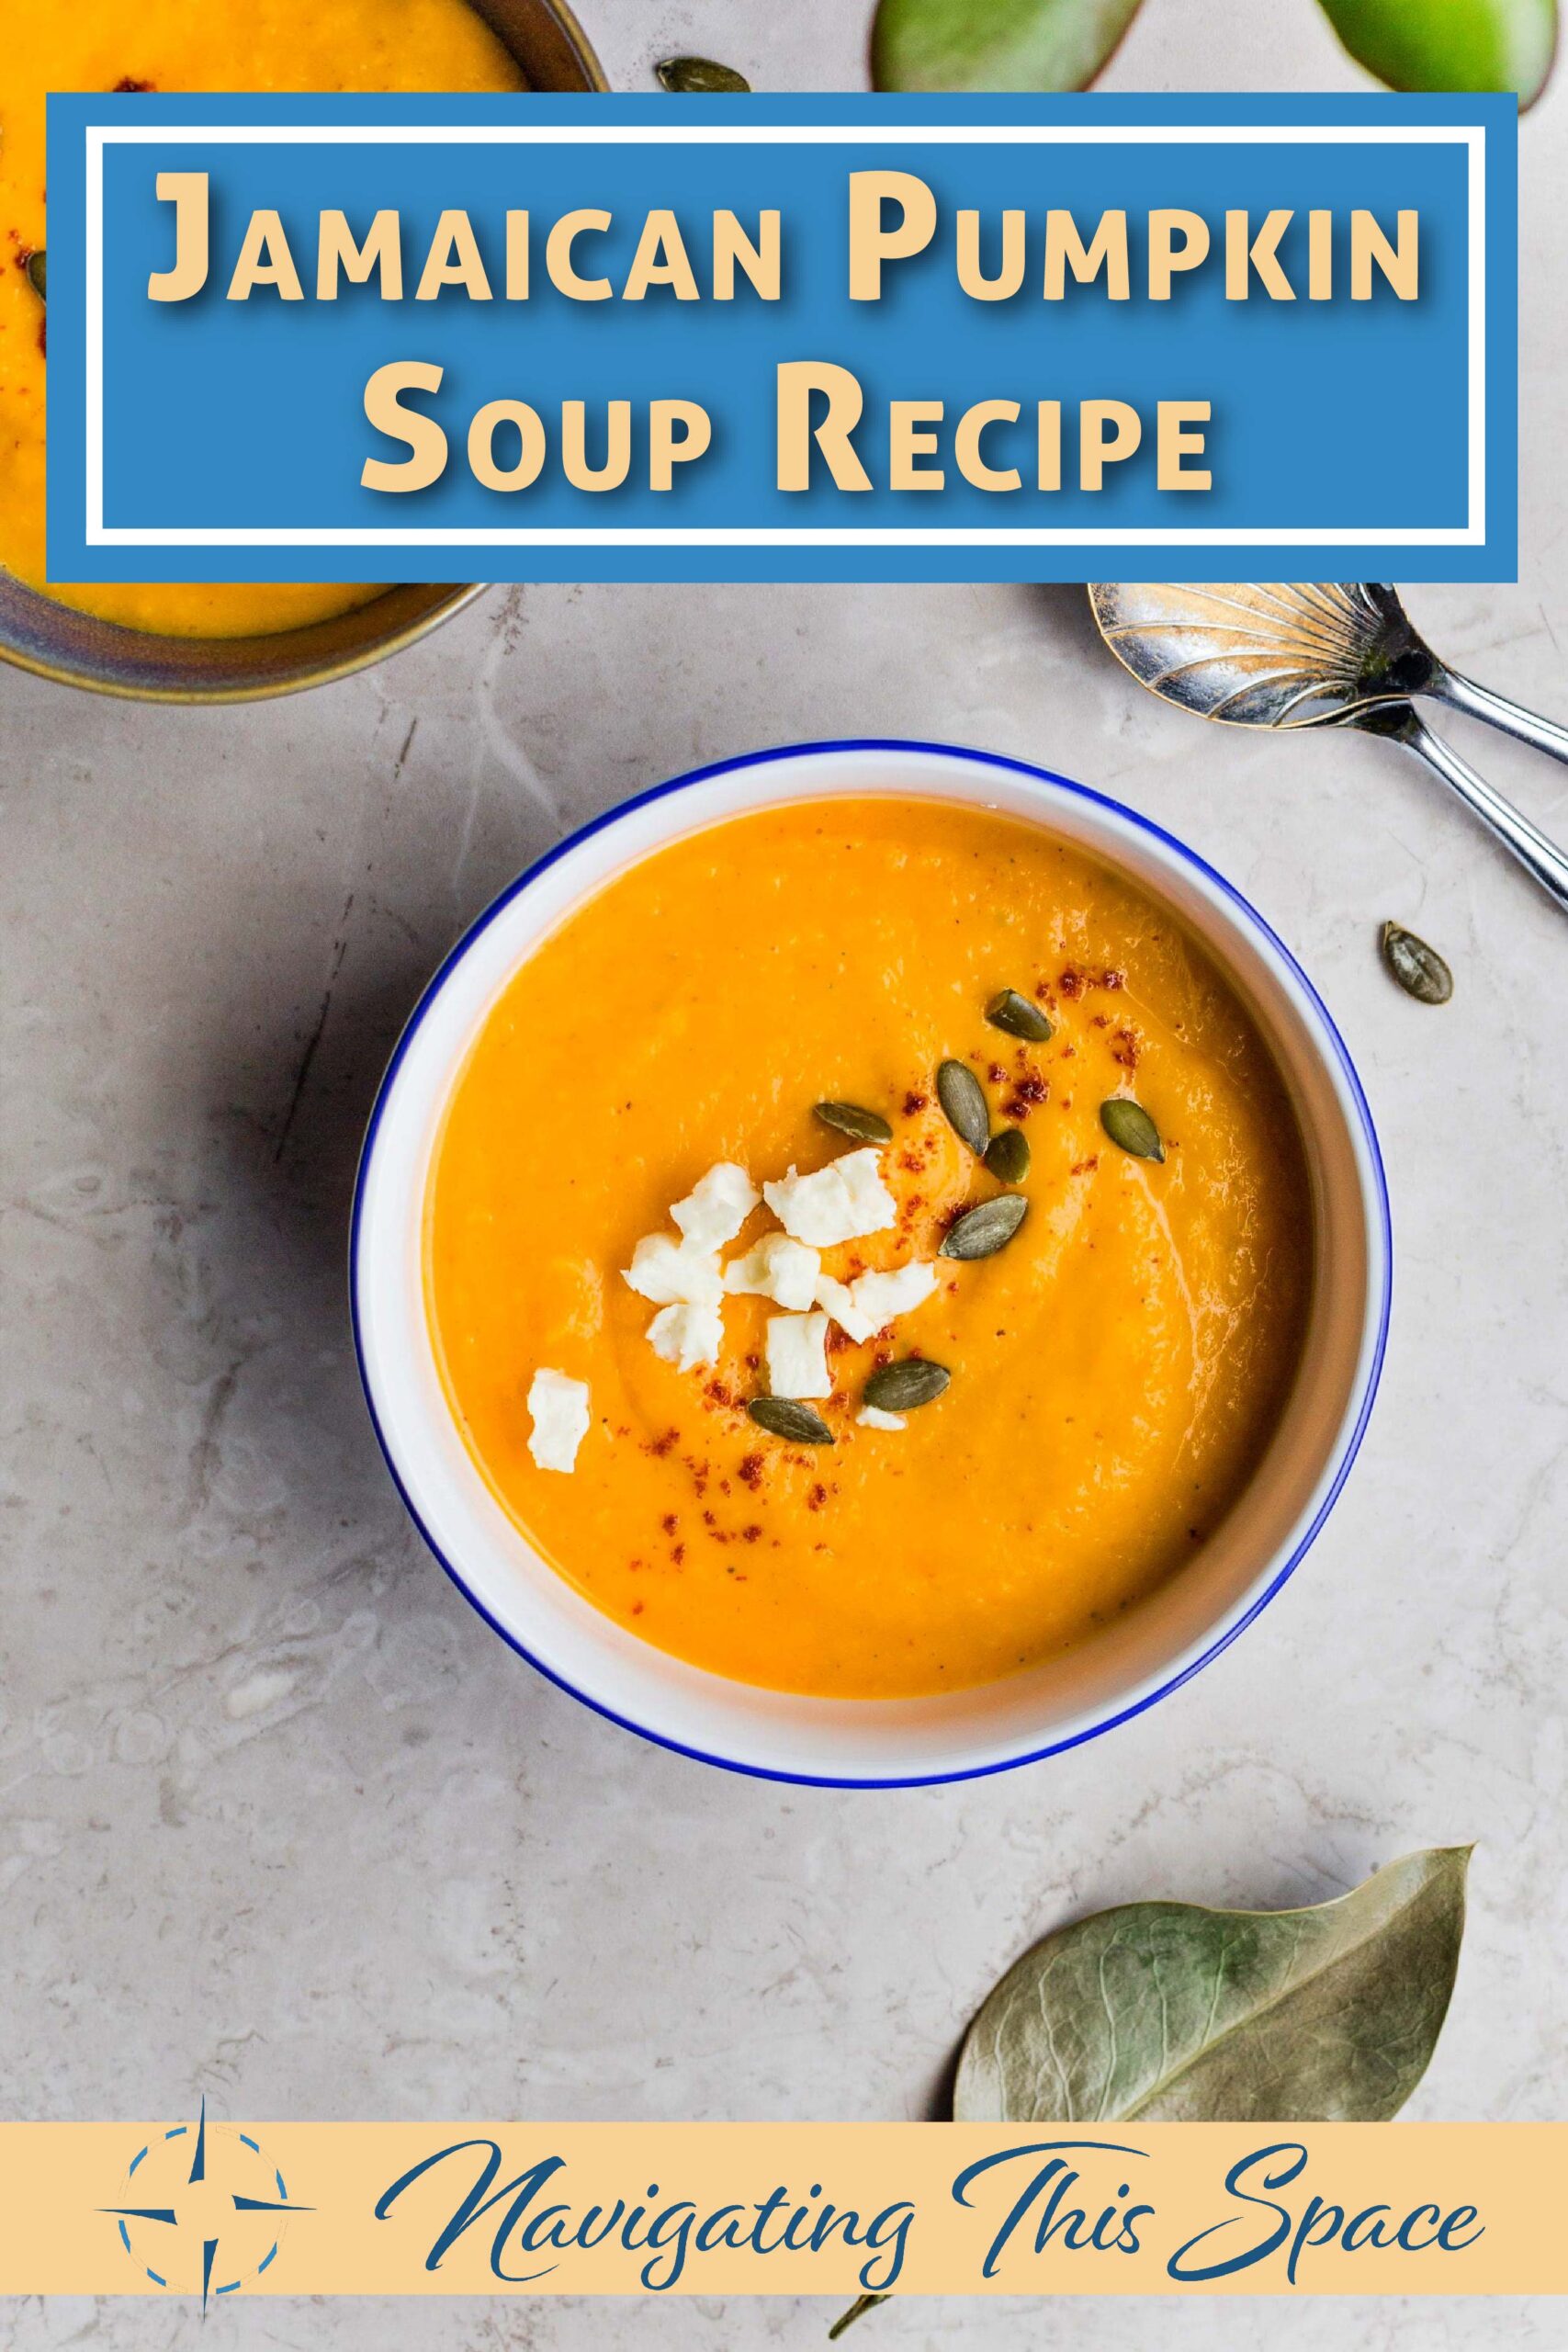 How to Make the Best-Tasting Jamaican Pumpkin Soup - Navigating This Space